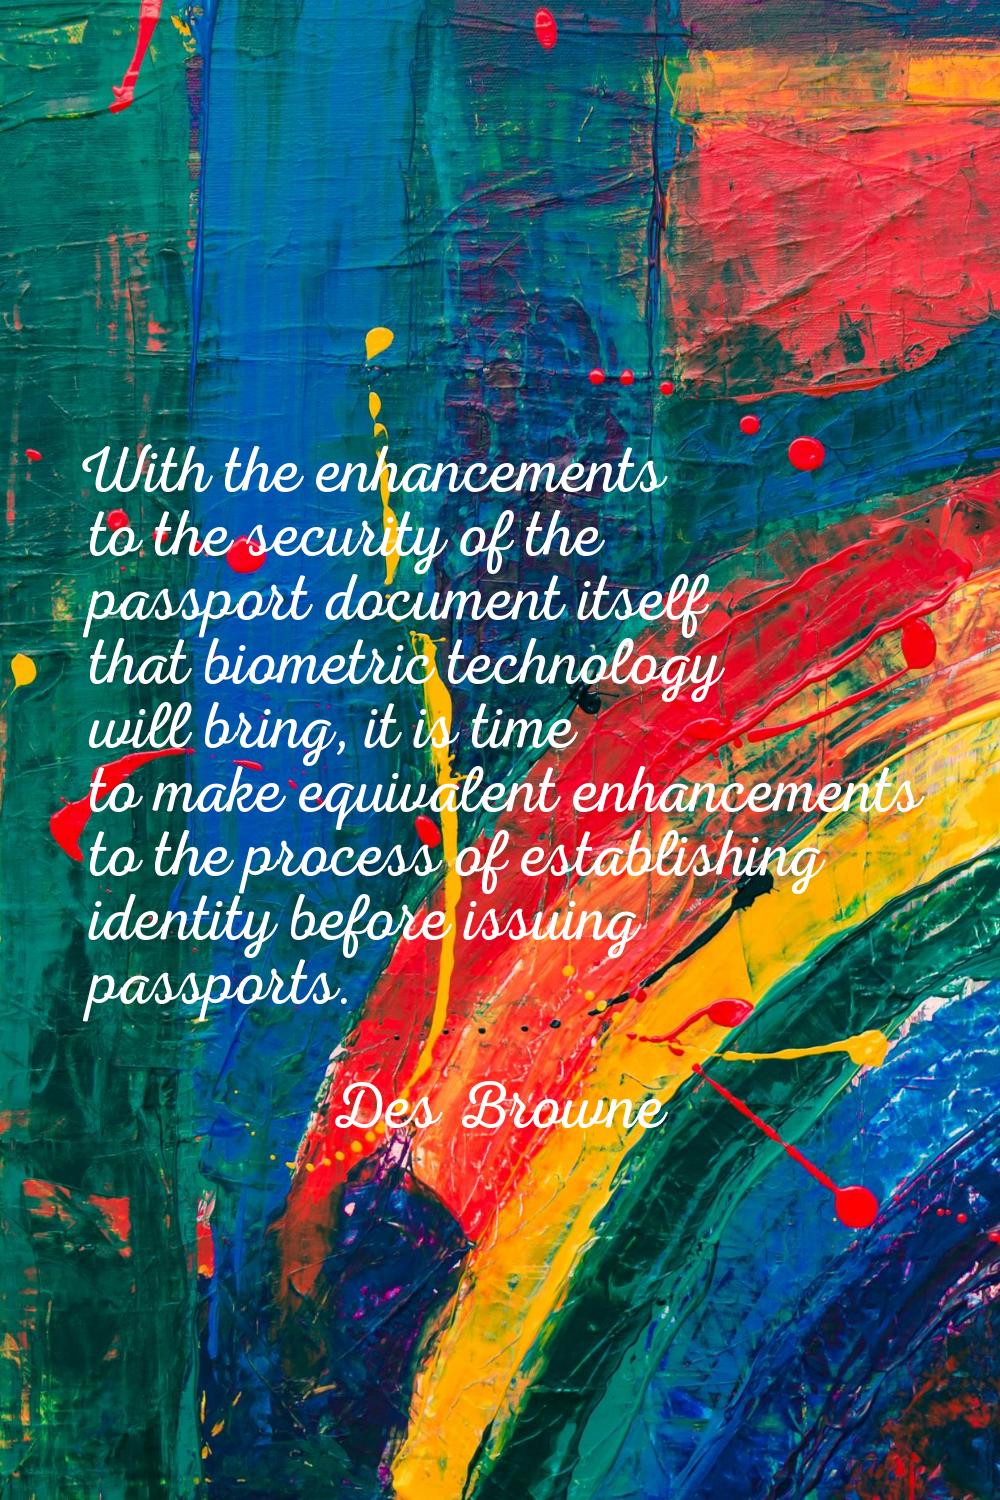 With the enhancements to the security of the passport document itself that biometric technology wil